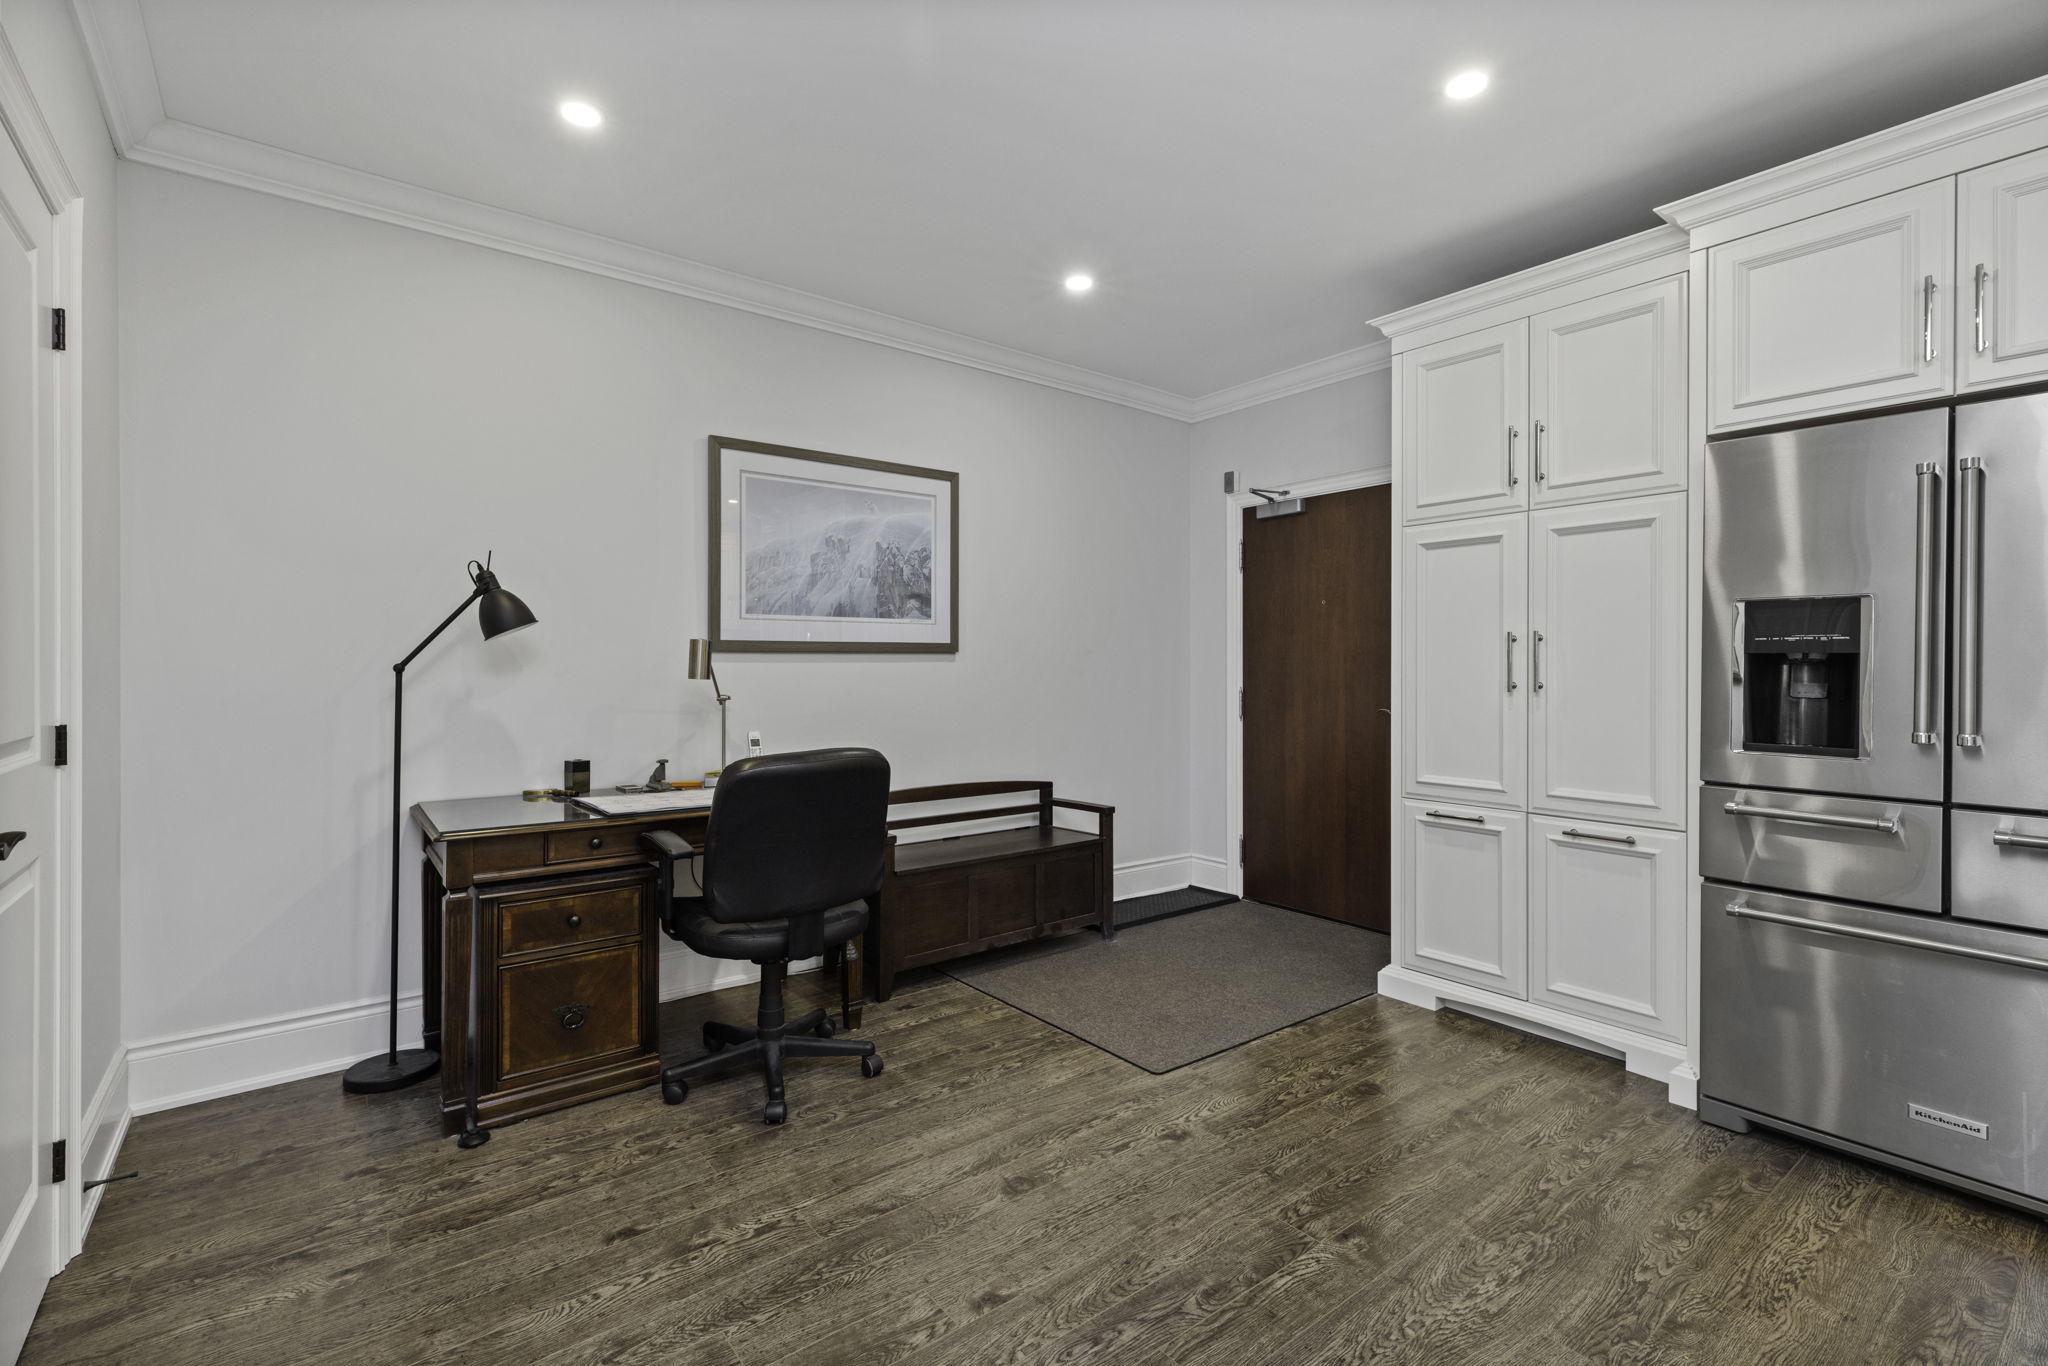 Welcoming entry way with large closet